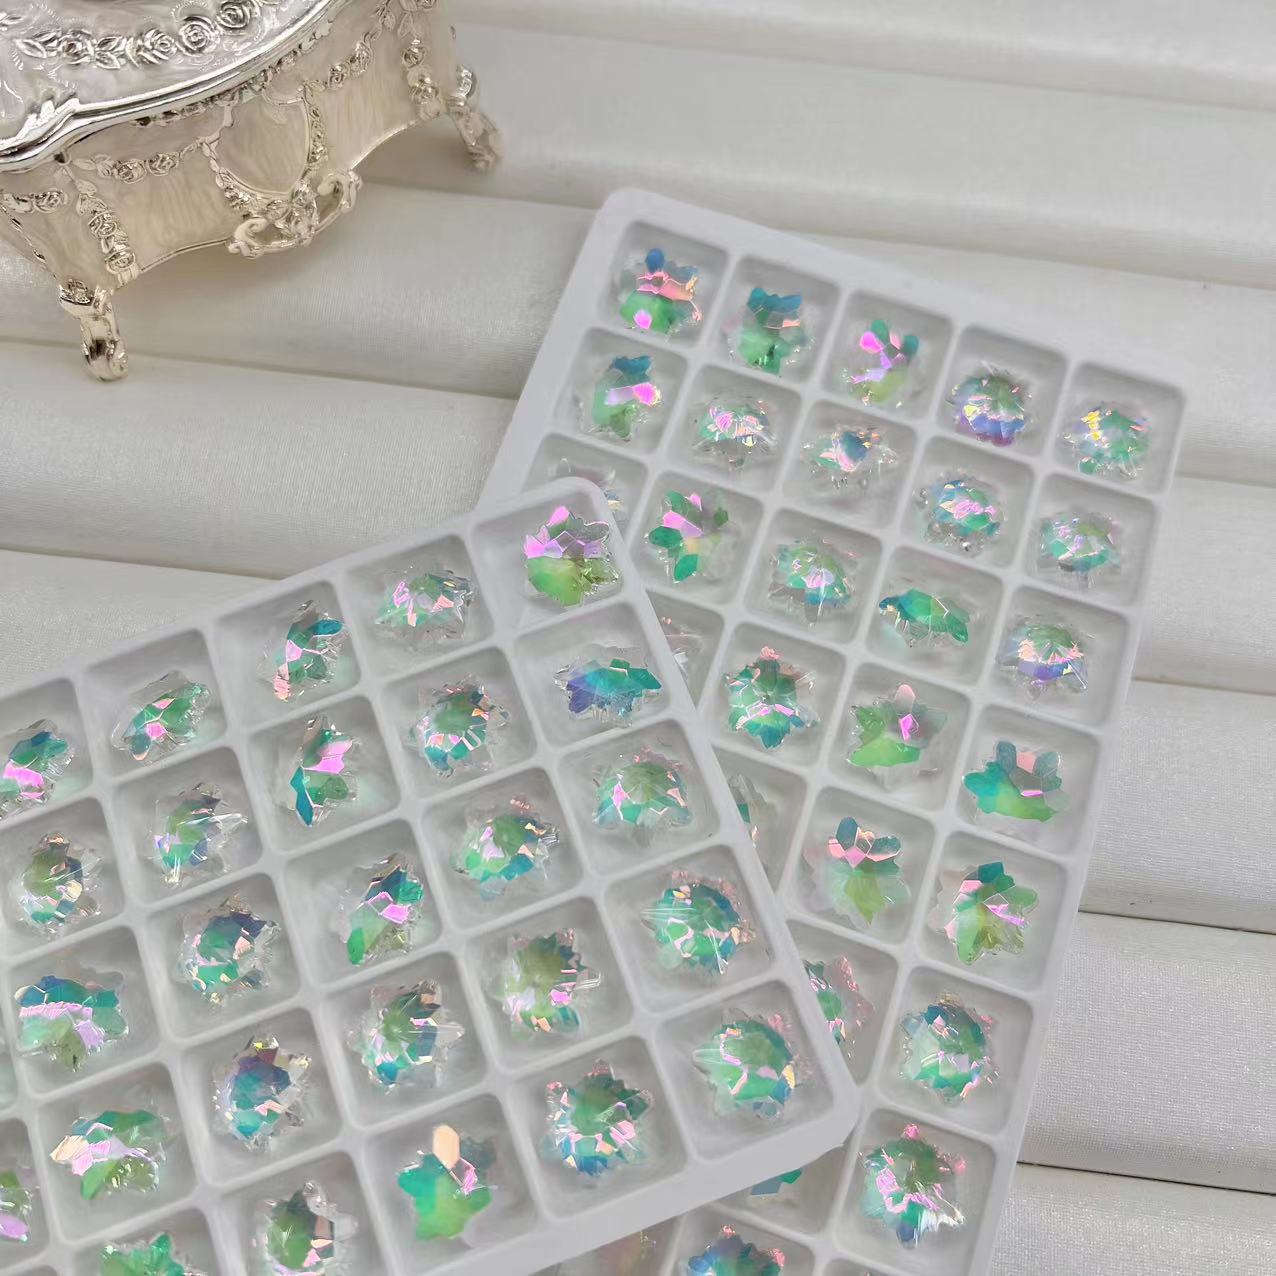 12mm Snowflake Coated Powder Bag Green Transparent Color Series K9 Nail Beauty Rhinestone Ornaments Accessories Wholesale